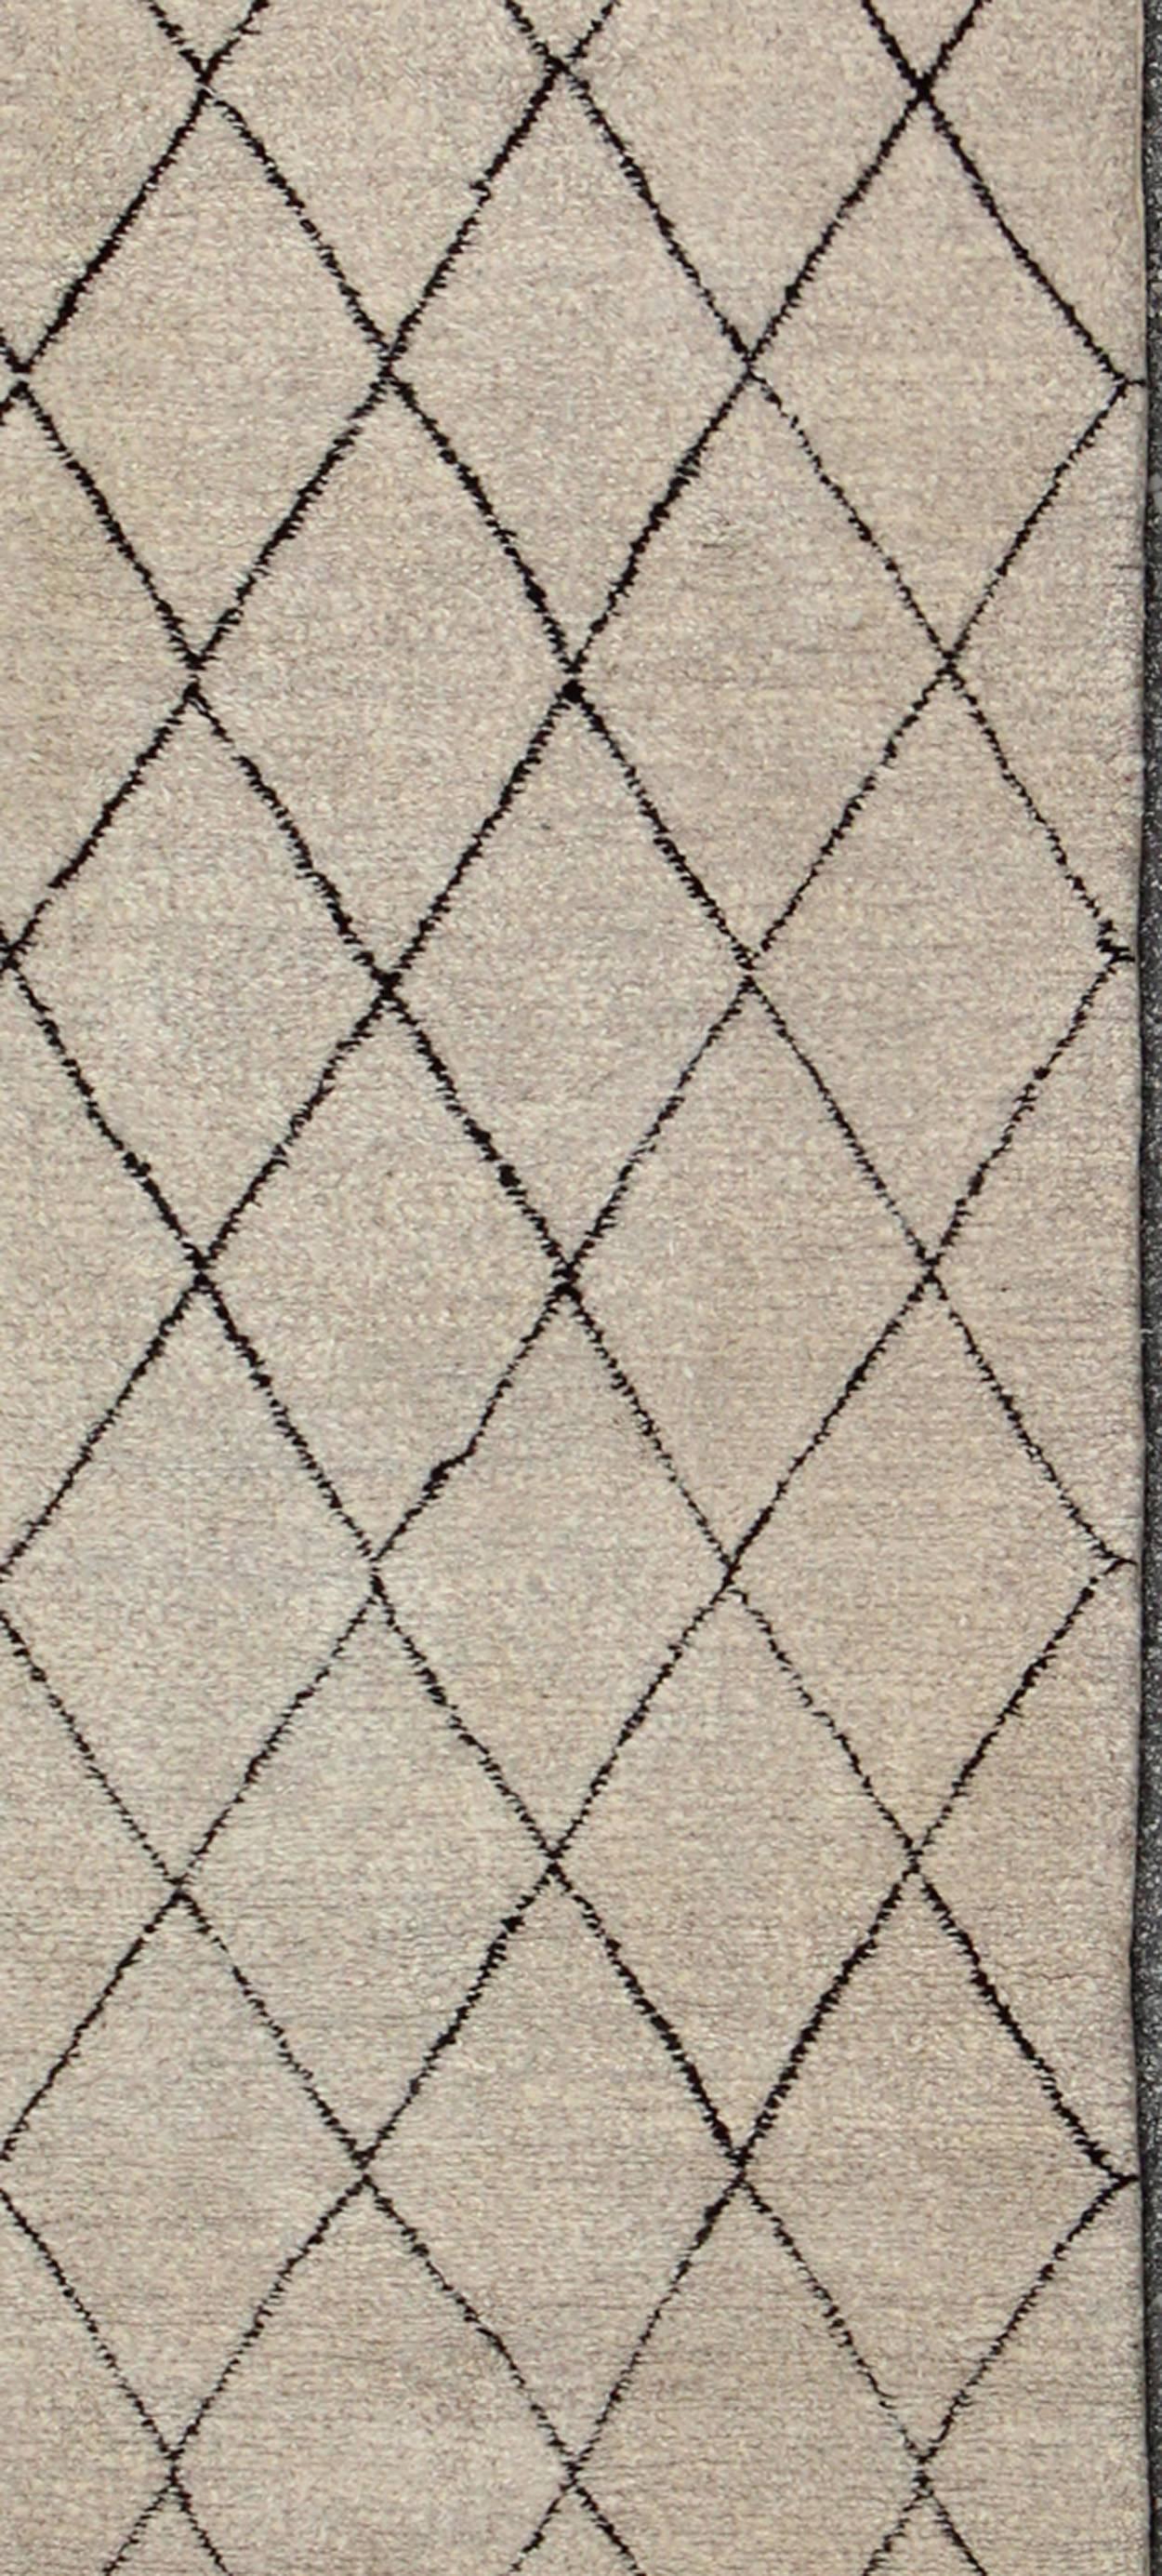 Tribal Long Contemporary Moroccan Runner with Brown and Ivory Diamond Pattern